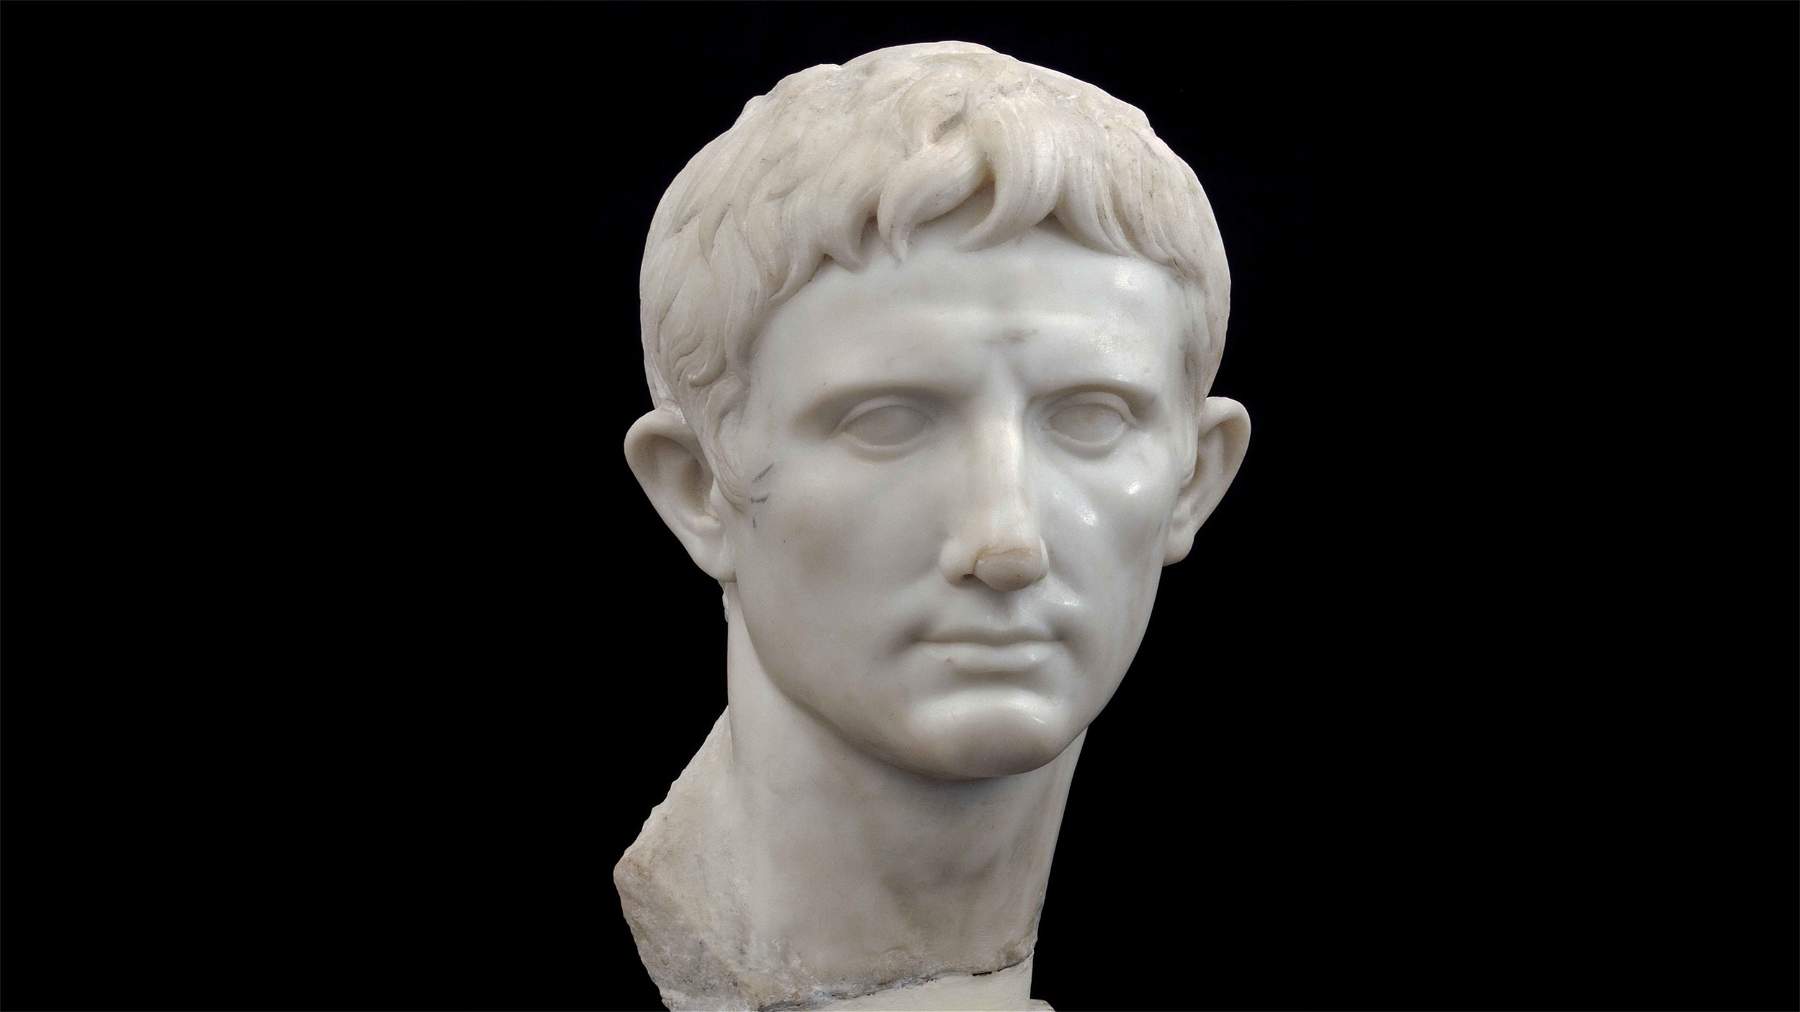 After 83 years, Sicily's finest portrait of Augustus returns home to Centuripe